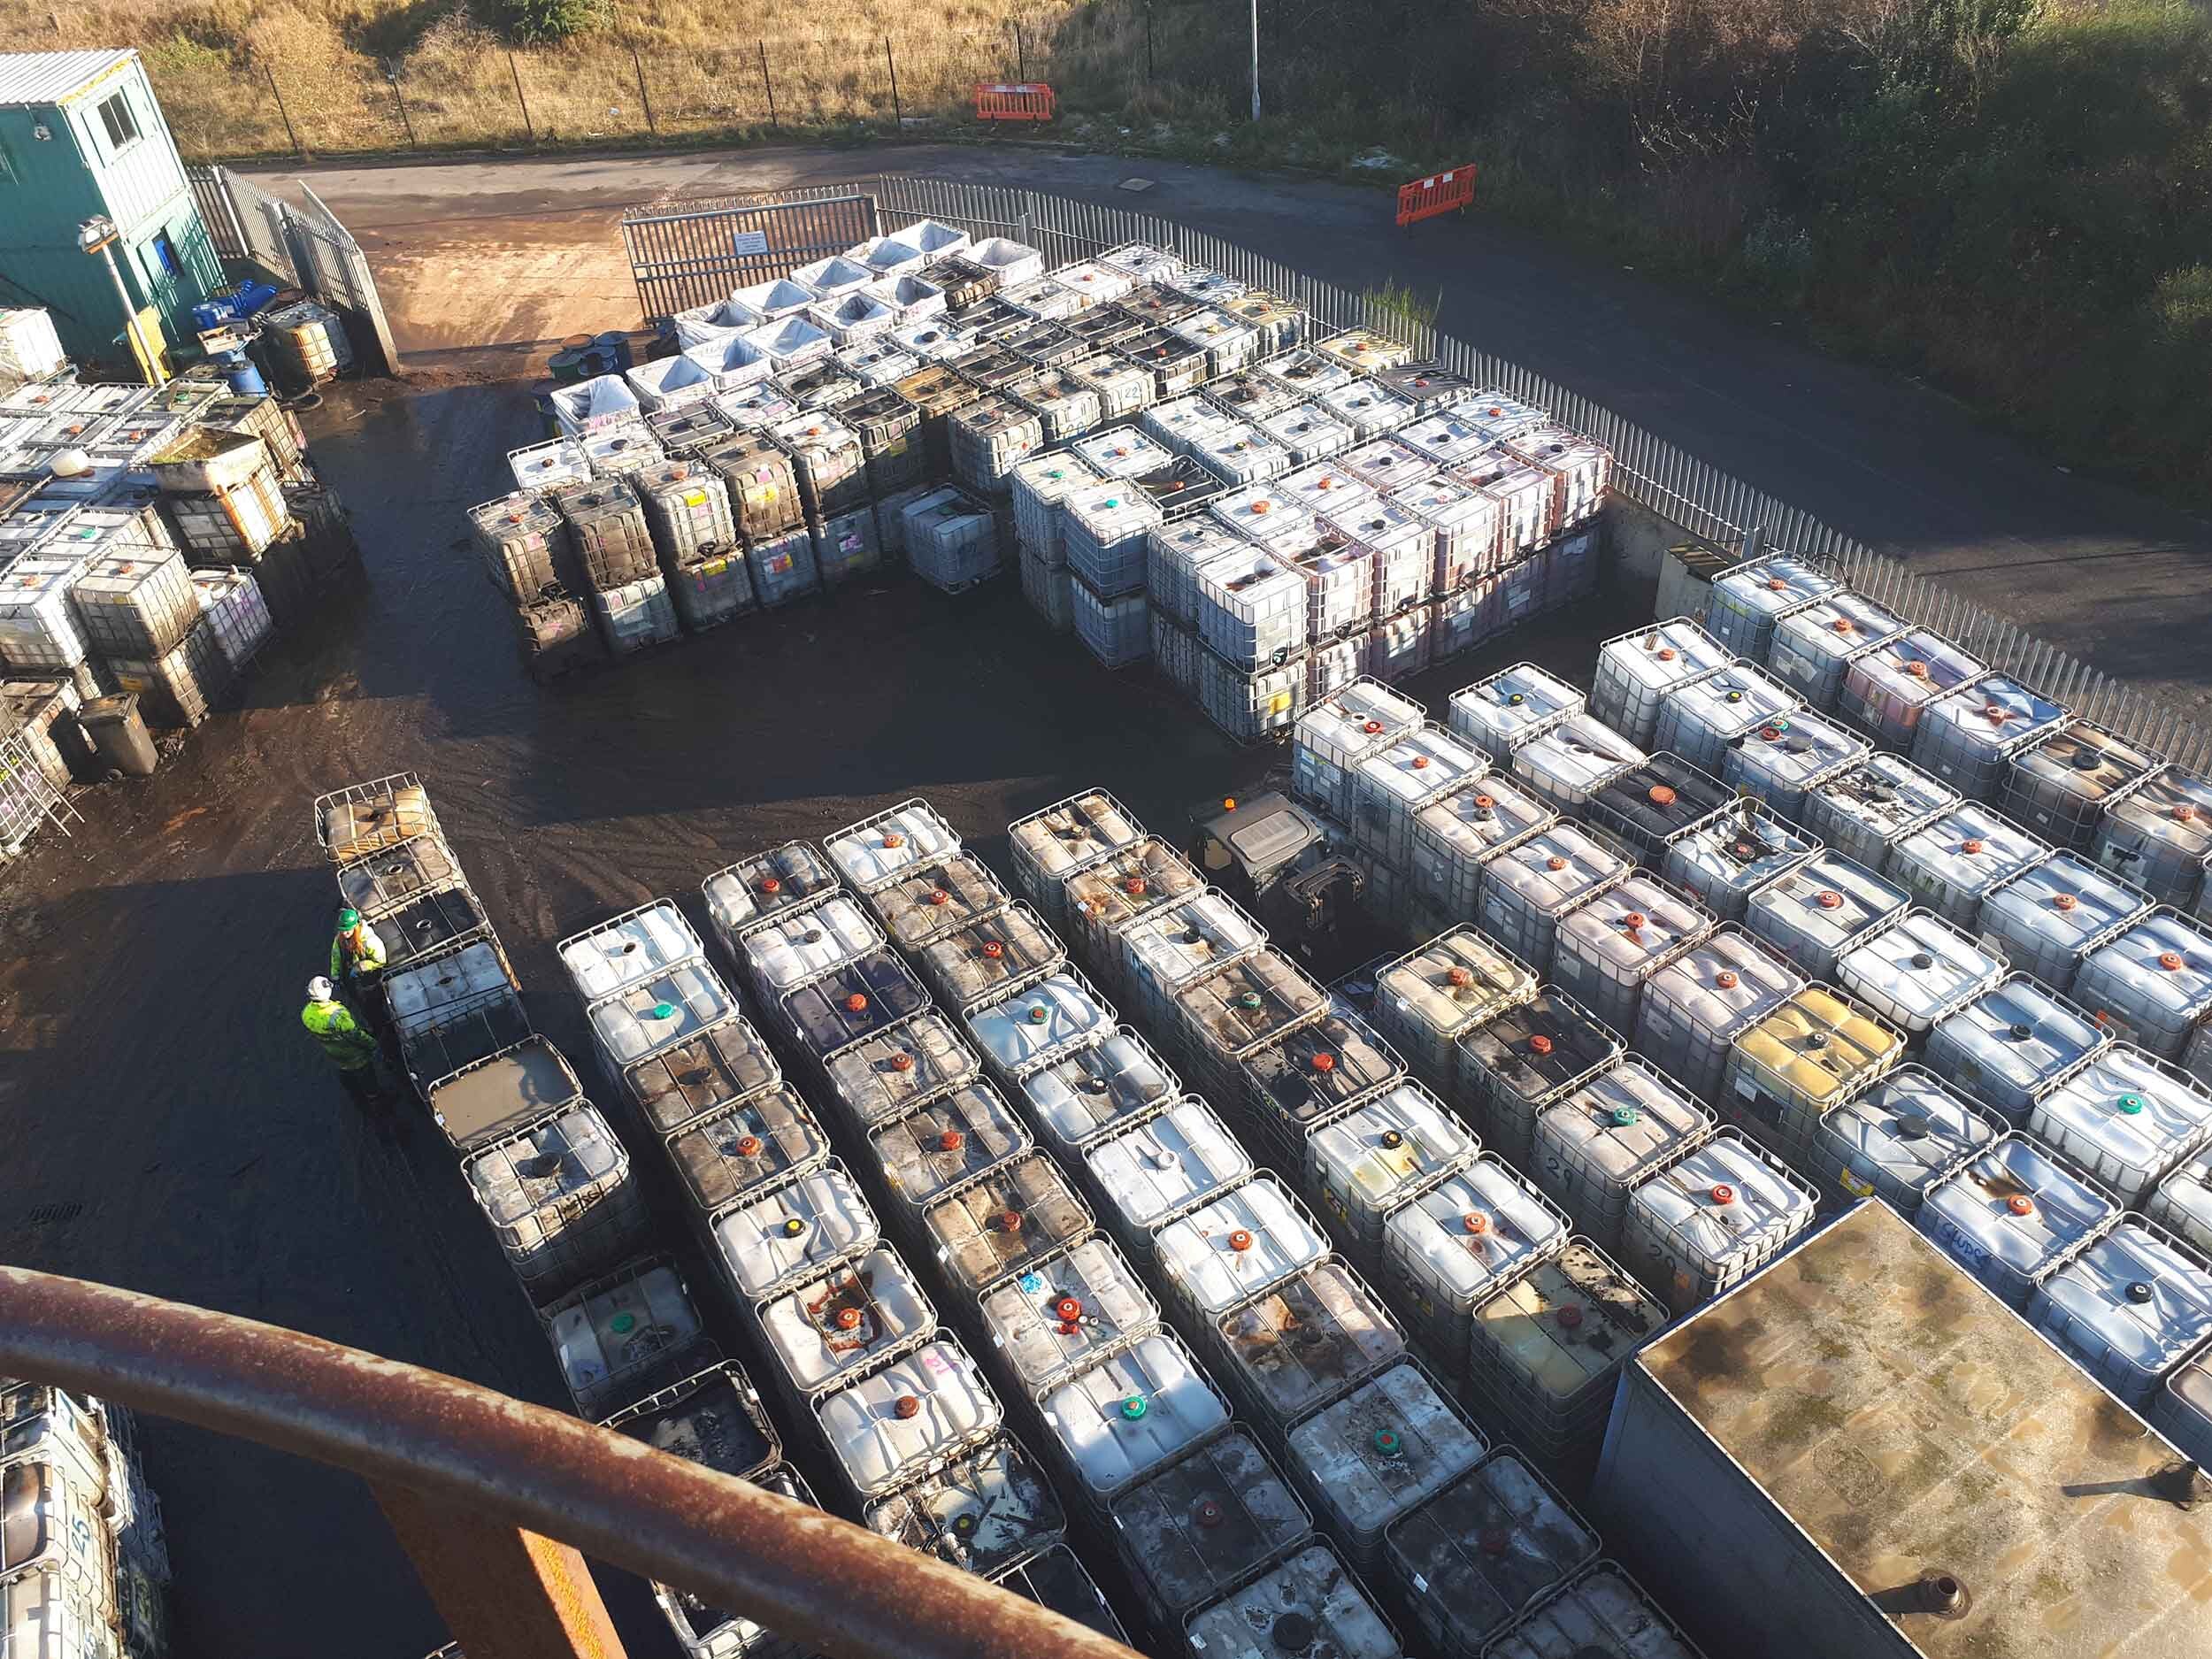 Rows of IBCs containing hazardous solid &amp; liquid wastes for treatment &amp; disposal with two people in high-vis jackets